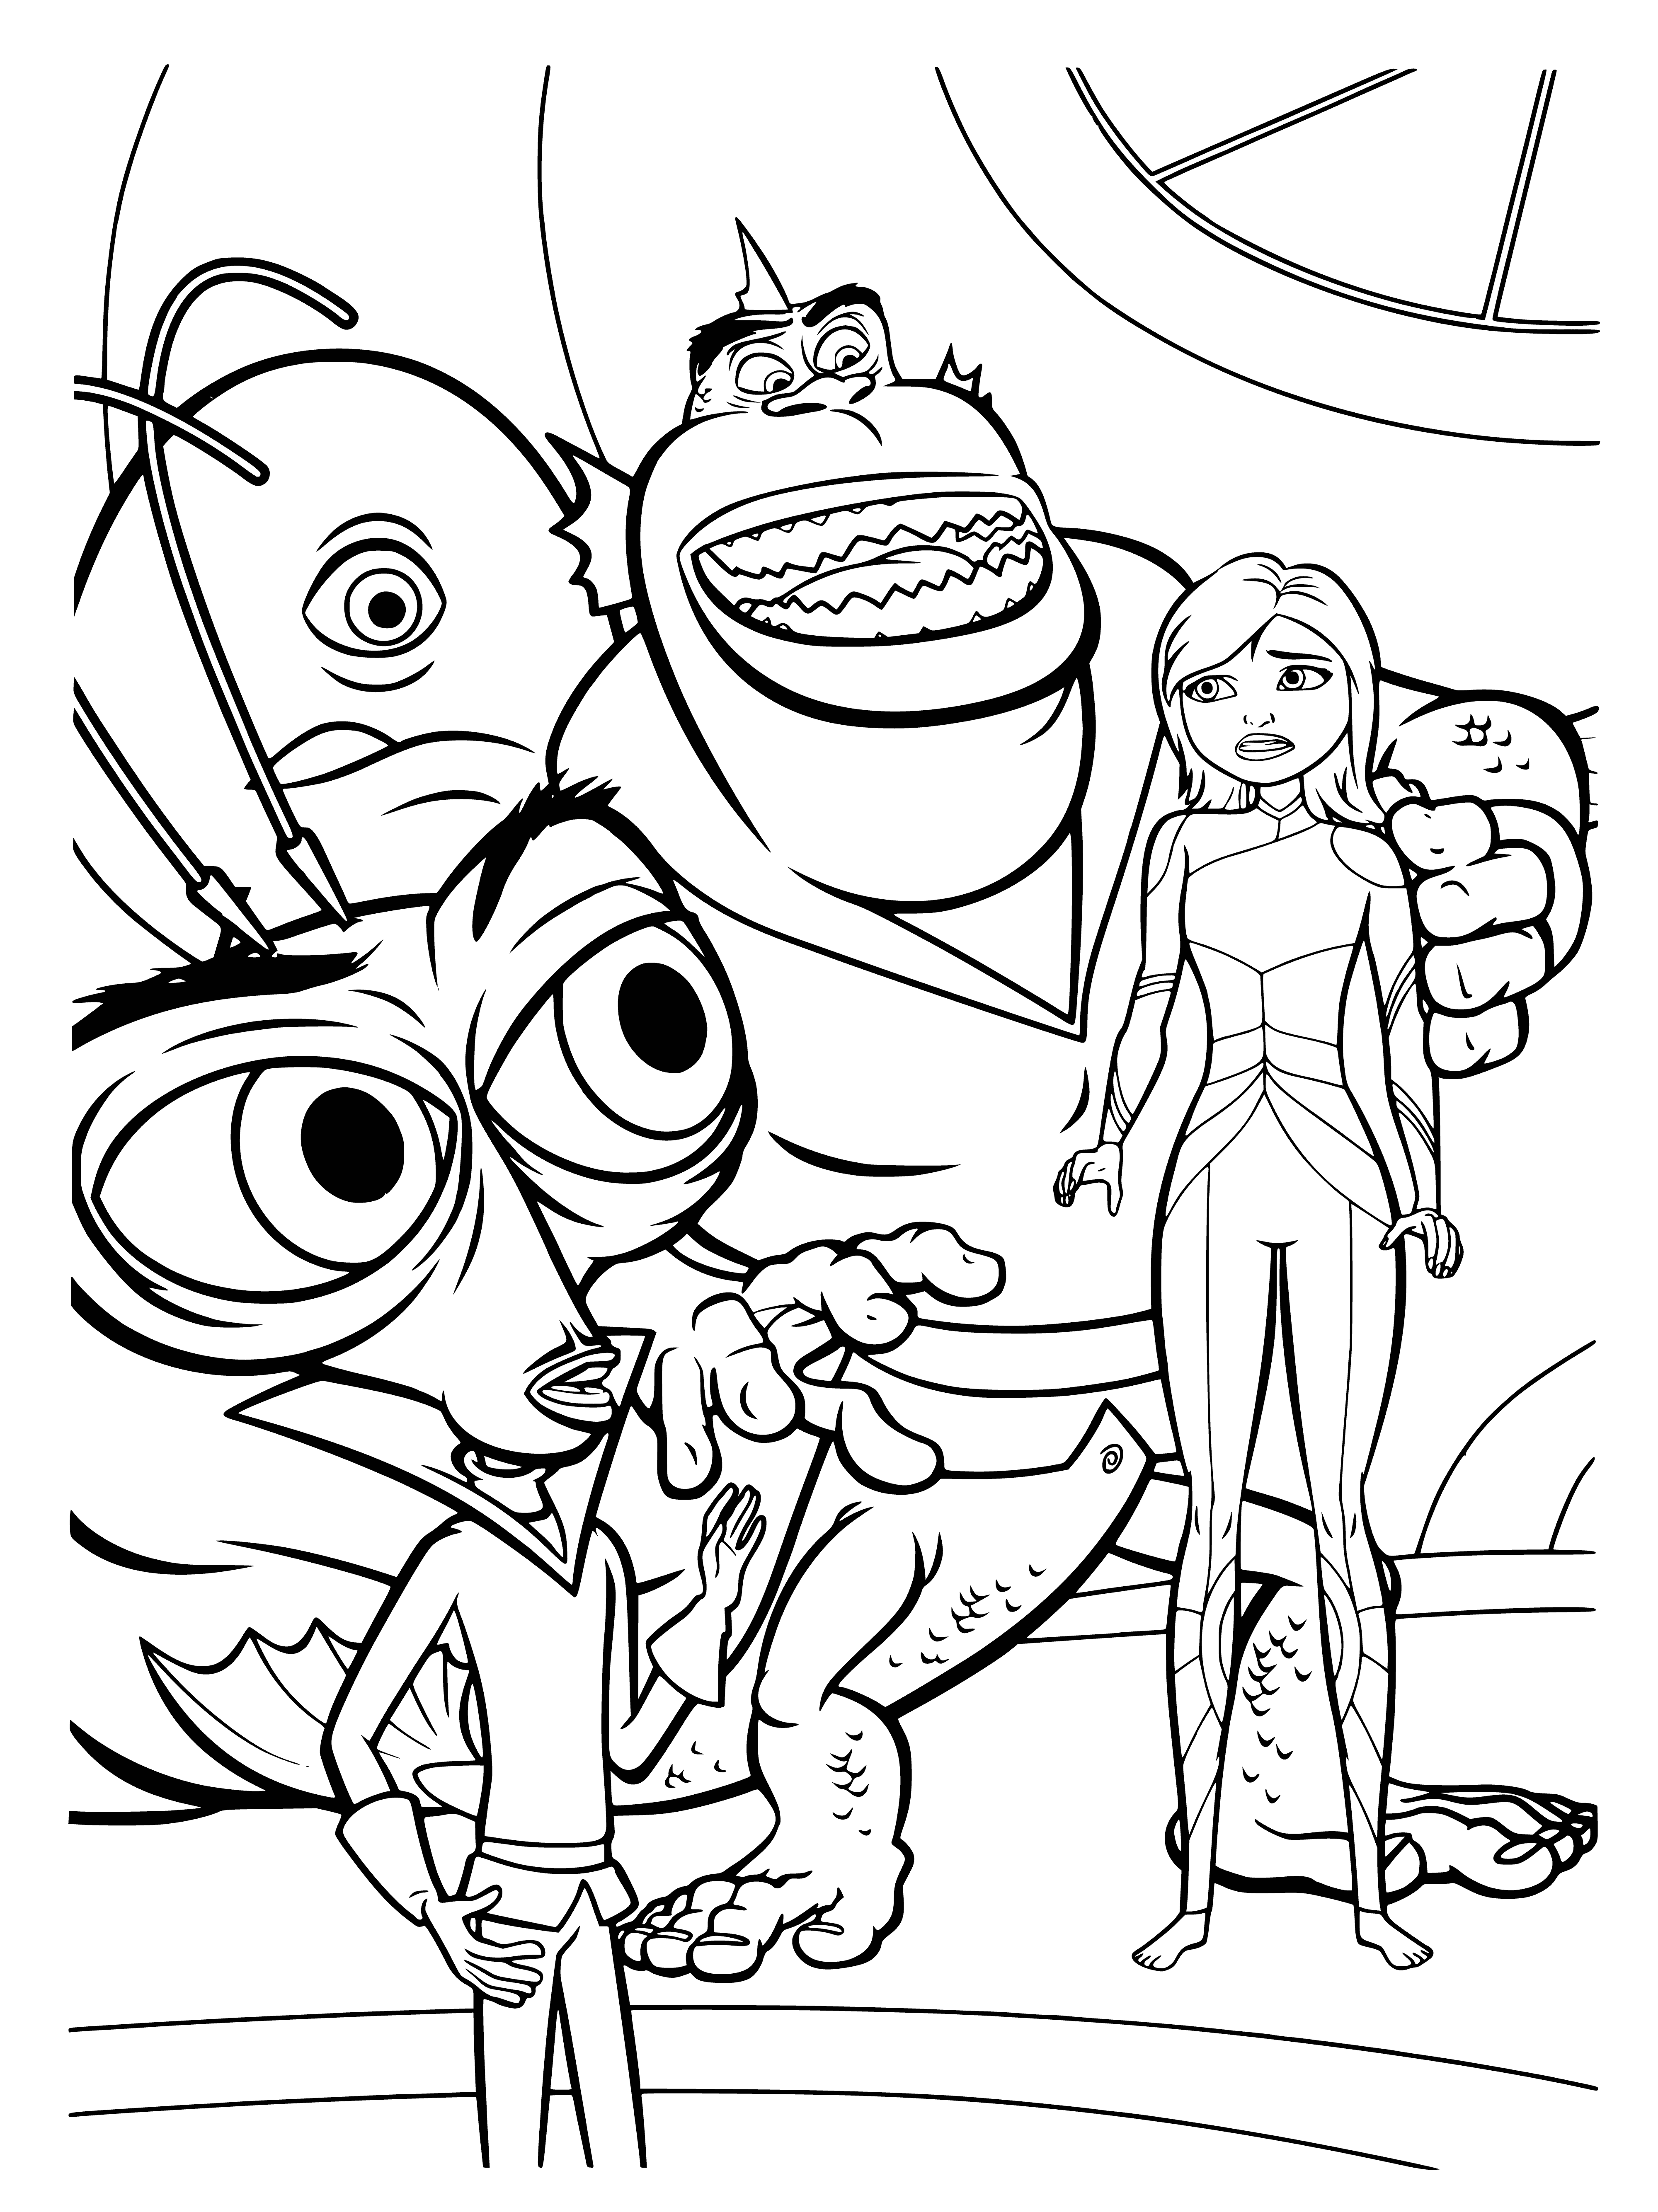 coloring page: Susan transformed into giant monster & attacking city due to alien intervention.